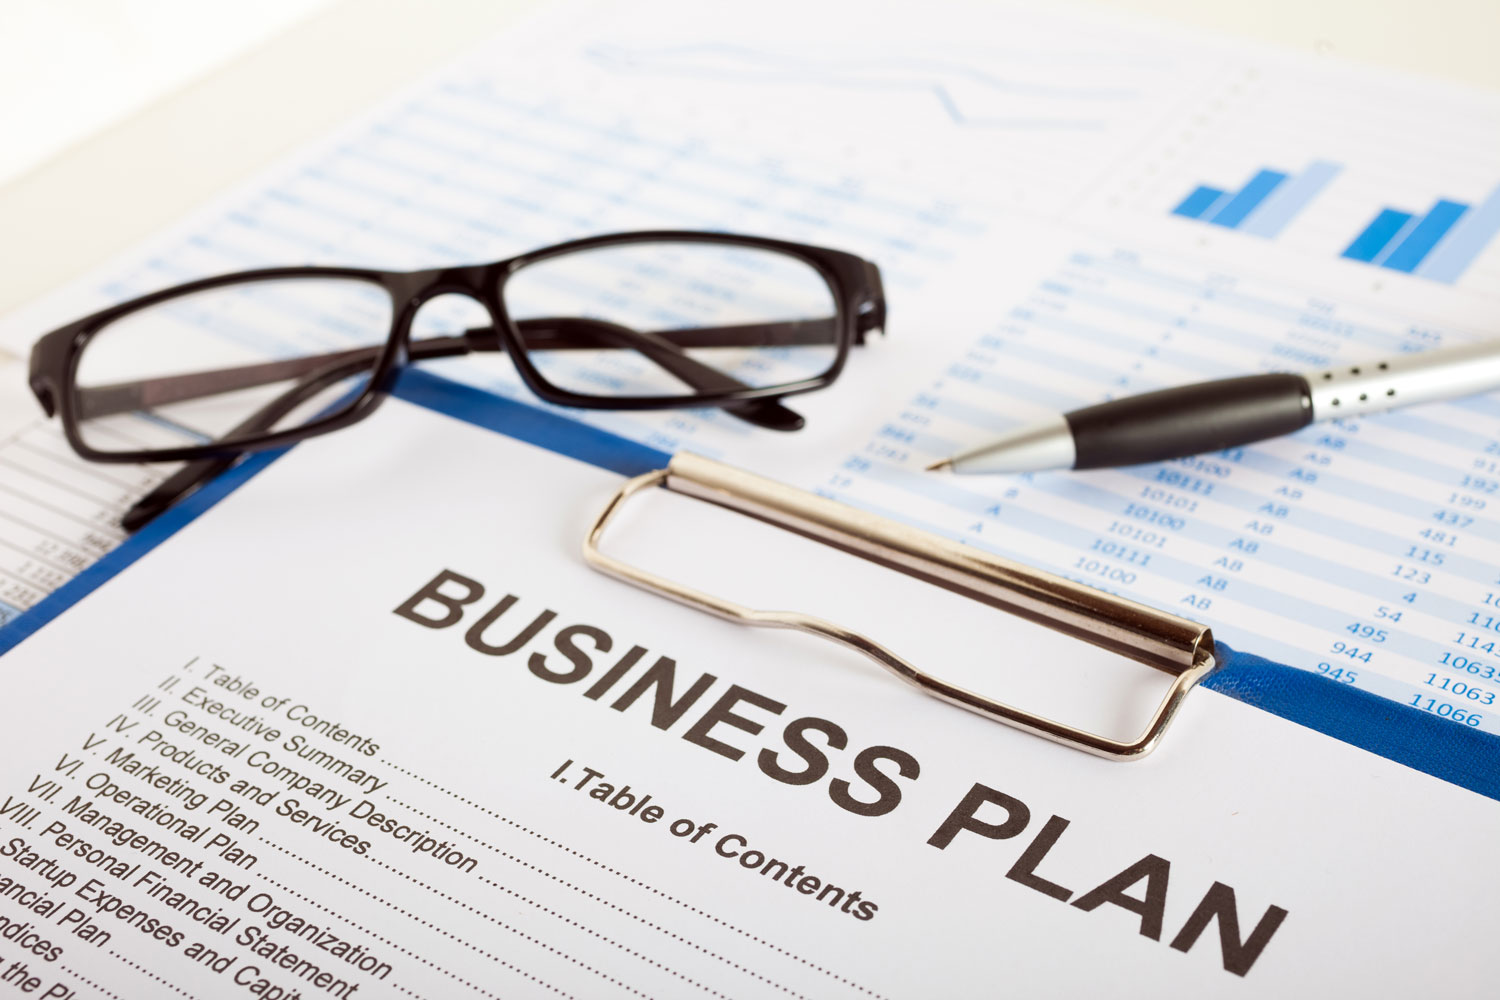 Business Plan for new business